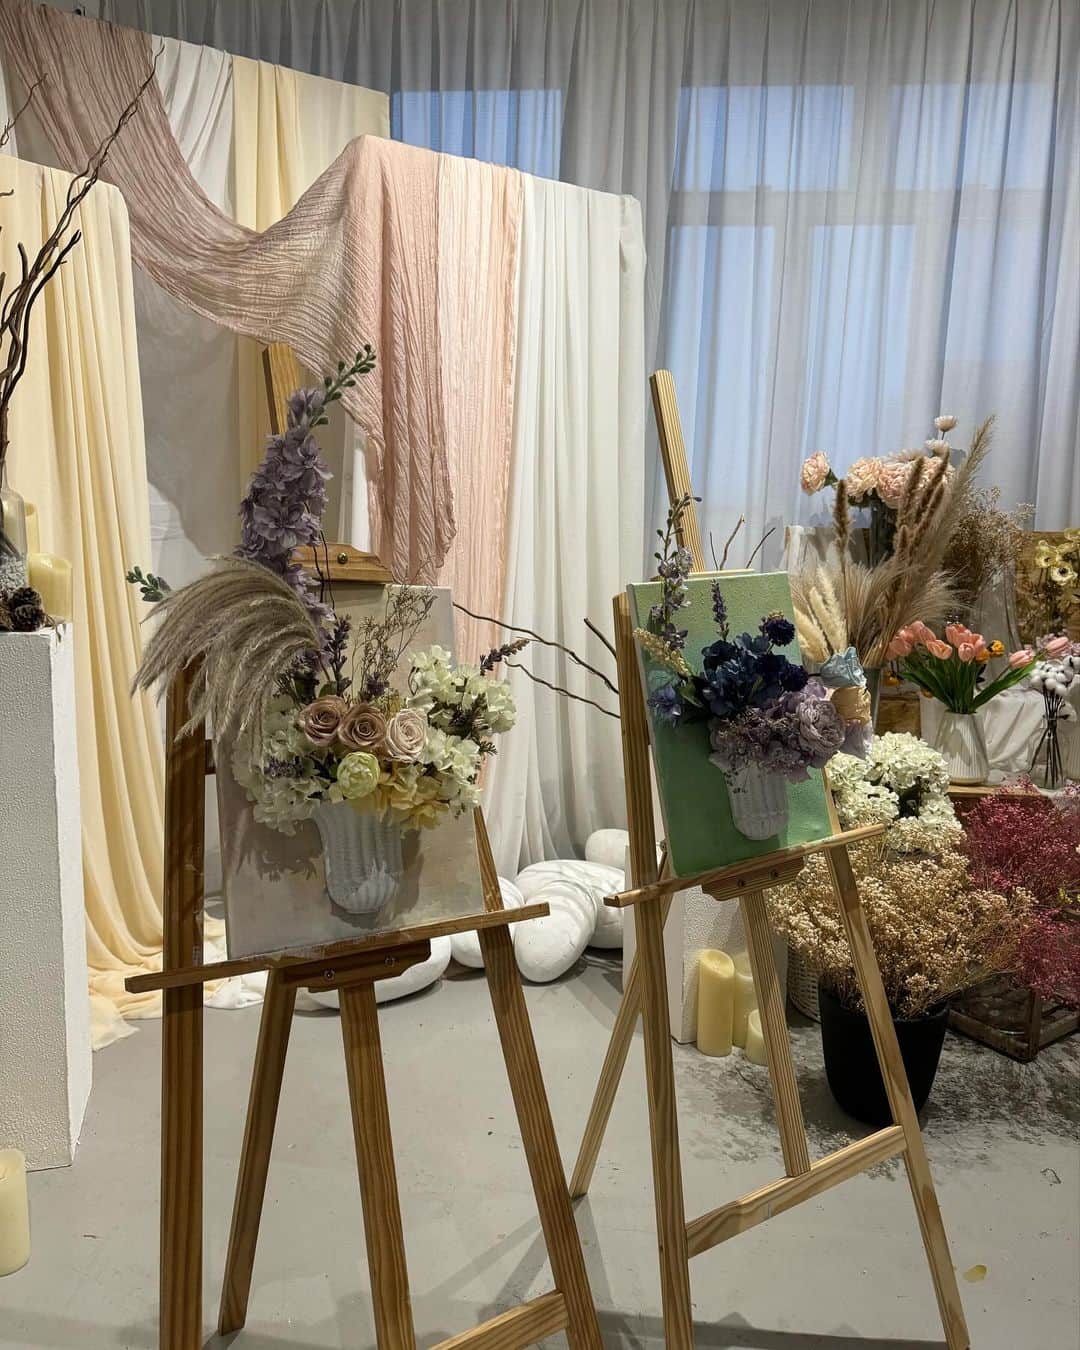 MICさんのインスタグラム写真 - (MICInstagram)「I went to a very fun lesson 💐  Art Workshop🎨 at @wearefacademy  A place where I can express myself as I wish while calming my mind 🌸 This time, I experienced Korean style 3D Floral Canvas Art 🐰  The workshop takes about 2.5~3 hours and consists of 3 parts 💕  ◆Part 1 ◆ Painting the canvas: Paint freely on the canvas board with a brush using a variety of techniques 🖼️  ◆Part 2 ◆ Handling different flowers: Participants learned how to handle different types of flowers such as silk flowers, dried flowers, and preserved flowers, and how to properly care for them🌹  ◆Part 3 ◆ Floral design: A three-dimensional vase was placed on top of the artwork from Part 1 to create a floral arrangement.  We chose our favorite flowers from among many flowers and put them in the vase💕 While asking the teacher for tips on how to create beautiful three-dimensional art 💐  And then it's done ✨✨  "Is this really our work?😳✨"  We were so excited to see how well it turned out 🌷 I was able to take home the work I made that day! I'm displaying mine at home 💐  The teacher was really, really kind. She carefully taught me what I didn't know. I enjoyed it even though I'm a beginner. And she was so energetic with a smile on her face that was really inspiring💕  @wearefacademy not only does Flower Workshop, but they also do bouquet orders and wedding venue design 👸  If you're interested, check out their account 💕  先日とってもたのしい習い事へ💐  @wearefacademy で開催される Art Workshop🎨  心を落ち着かせながら自分が思うままに表現できる場所🌸 今回は韓国式の3D Floral Canvas Artを体験してきました🐰  ワークショップの所要時間は約2時間半～3時間で、3つのパートで構成されているよ💕  ◆Part 1  様々な技法を使って自由に筆を使い、キャンバスボードにペイント🖼️ 皆さんもそれぞれ個性が出てて他の方のを見るのも楽しい💕  ◆Part 2  シルクフラワー、ドライフラワー、プリザーブドフラワーなど、さまざまな種類の花の扱い方、適切なお手入れ方法を実際に体験しました🌹  ◆Part 3  描いたアートの上に立体的な花瓶を置いて沢山のお花の中から好きなお花を選んで先生にコツを伺いながら挿していくよ💐  そして完成〜✨\( ˙▿˙　)/✨  「これ私たちの作品?!」ってあまりの出来栄えに大盛り上がり🌷 作った作品はその日に持ち帰れる！ わたしもお家に飾ってるよ💐  先生が本当に優しくて わからないところも丁寧に教えてくれたから初心者でも楽しめたよ👸 とっても笑顔でエネルギッシュな方でめっちゃ元気をもらえた💕  @wearefacademy さんではFlower Workshopだけでなくブーケのオーダーや結婚式場のデザインも行っているそうです👸  興味のある方はアカウント見てみてね💕」10月29日 21時46分 - micmofmof